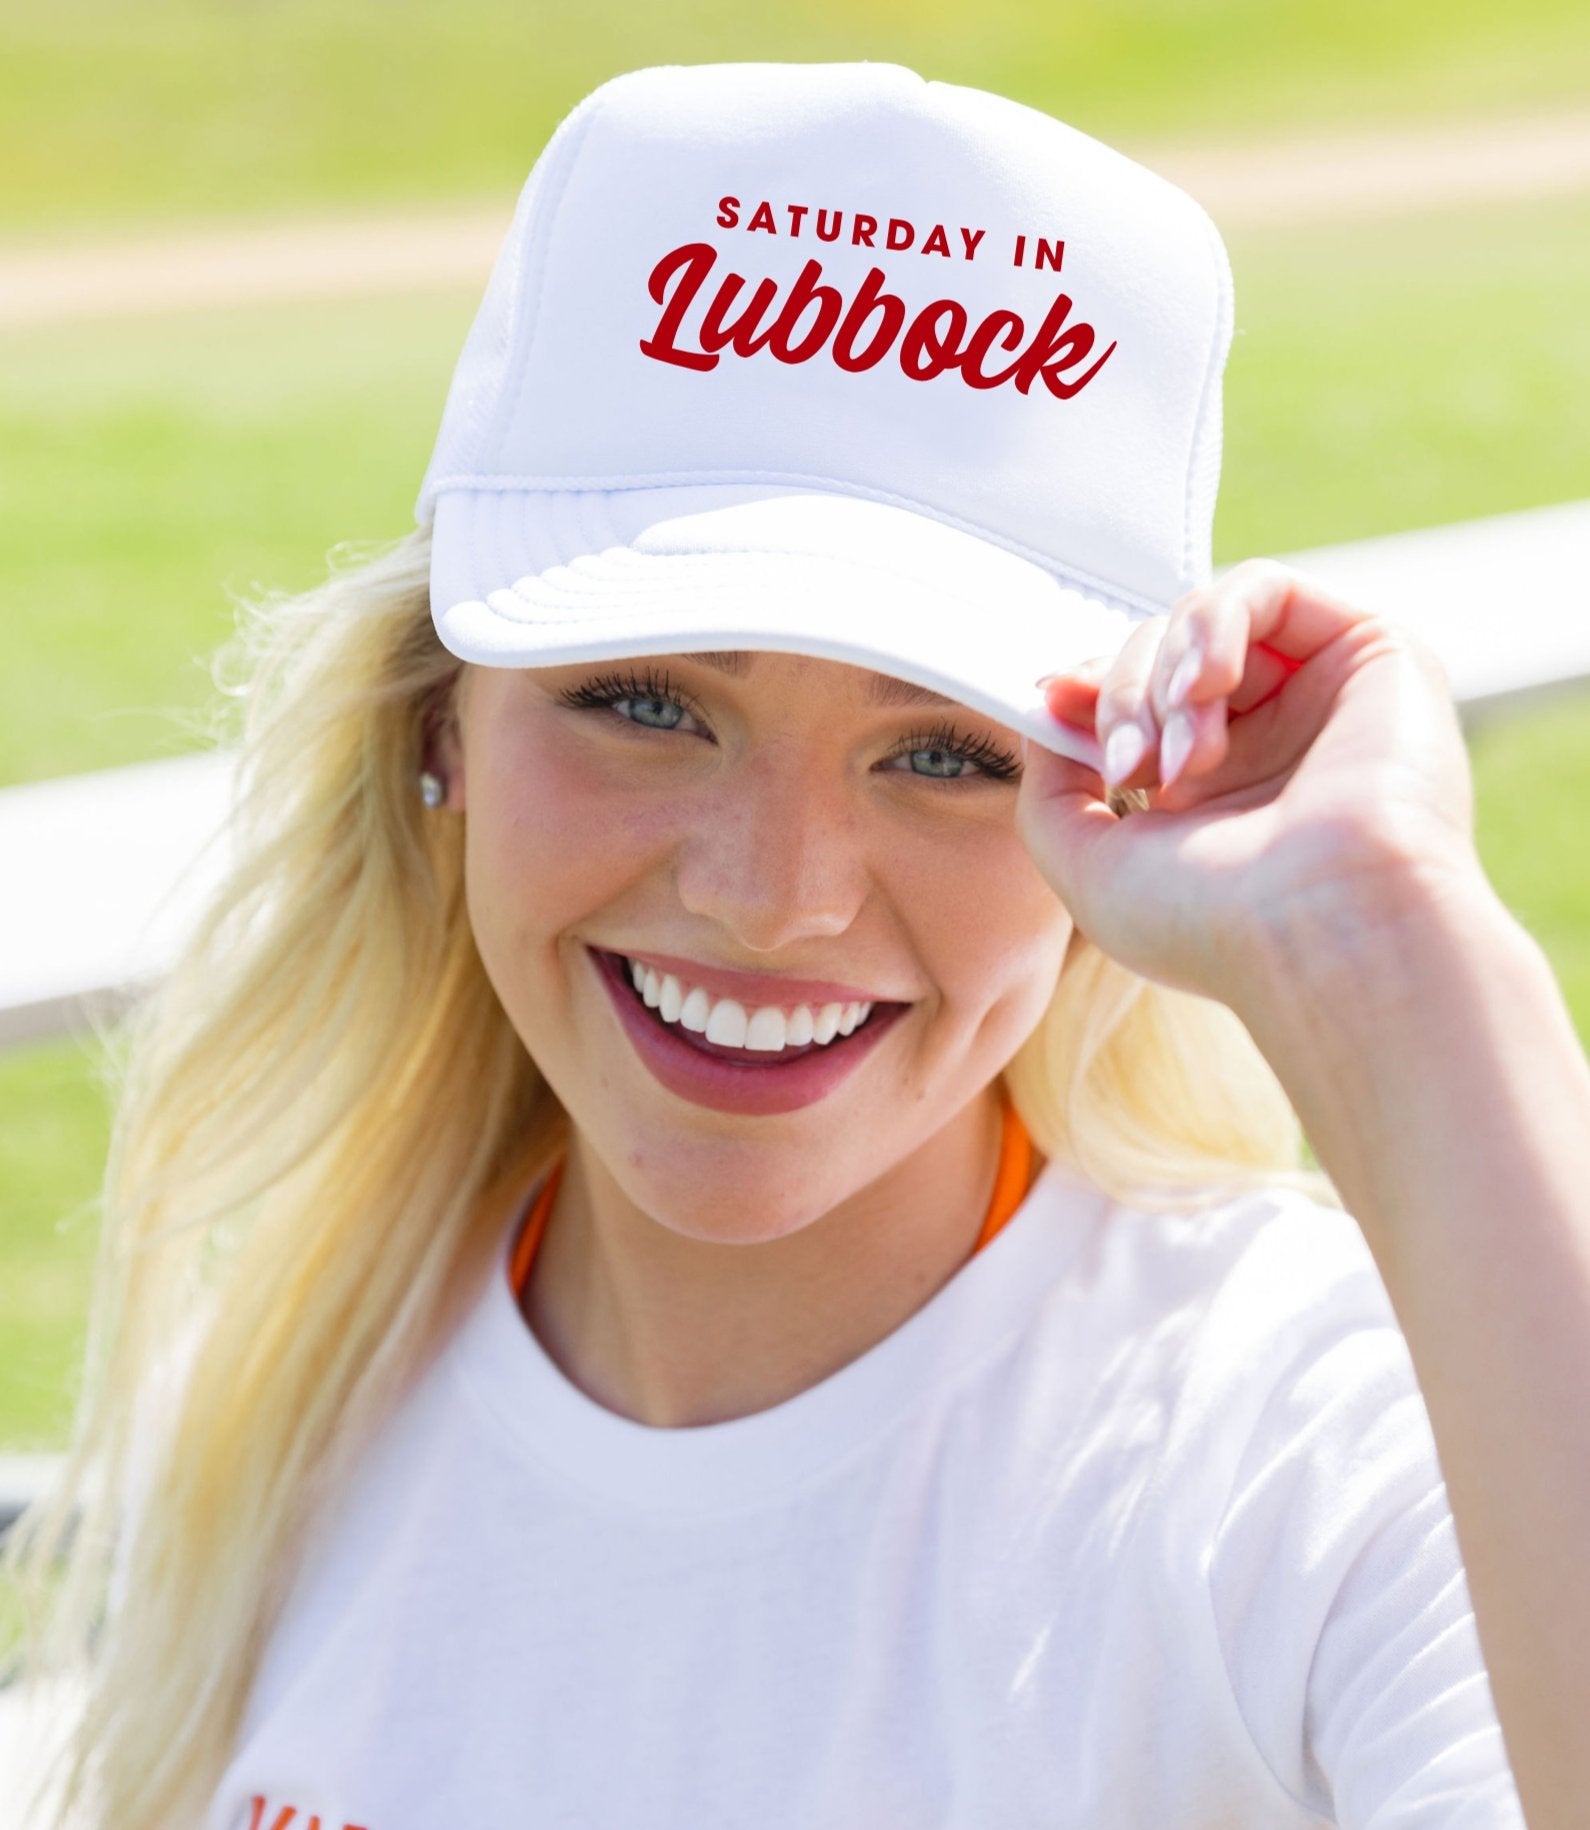 A white trucker hat from our gameday collection that reads "Saturday in Lubbock" on a white background.